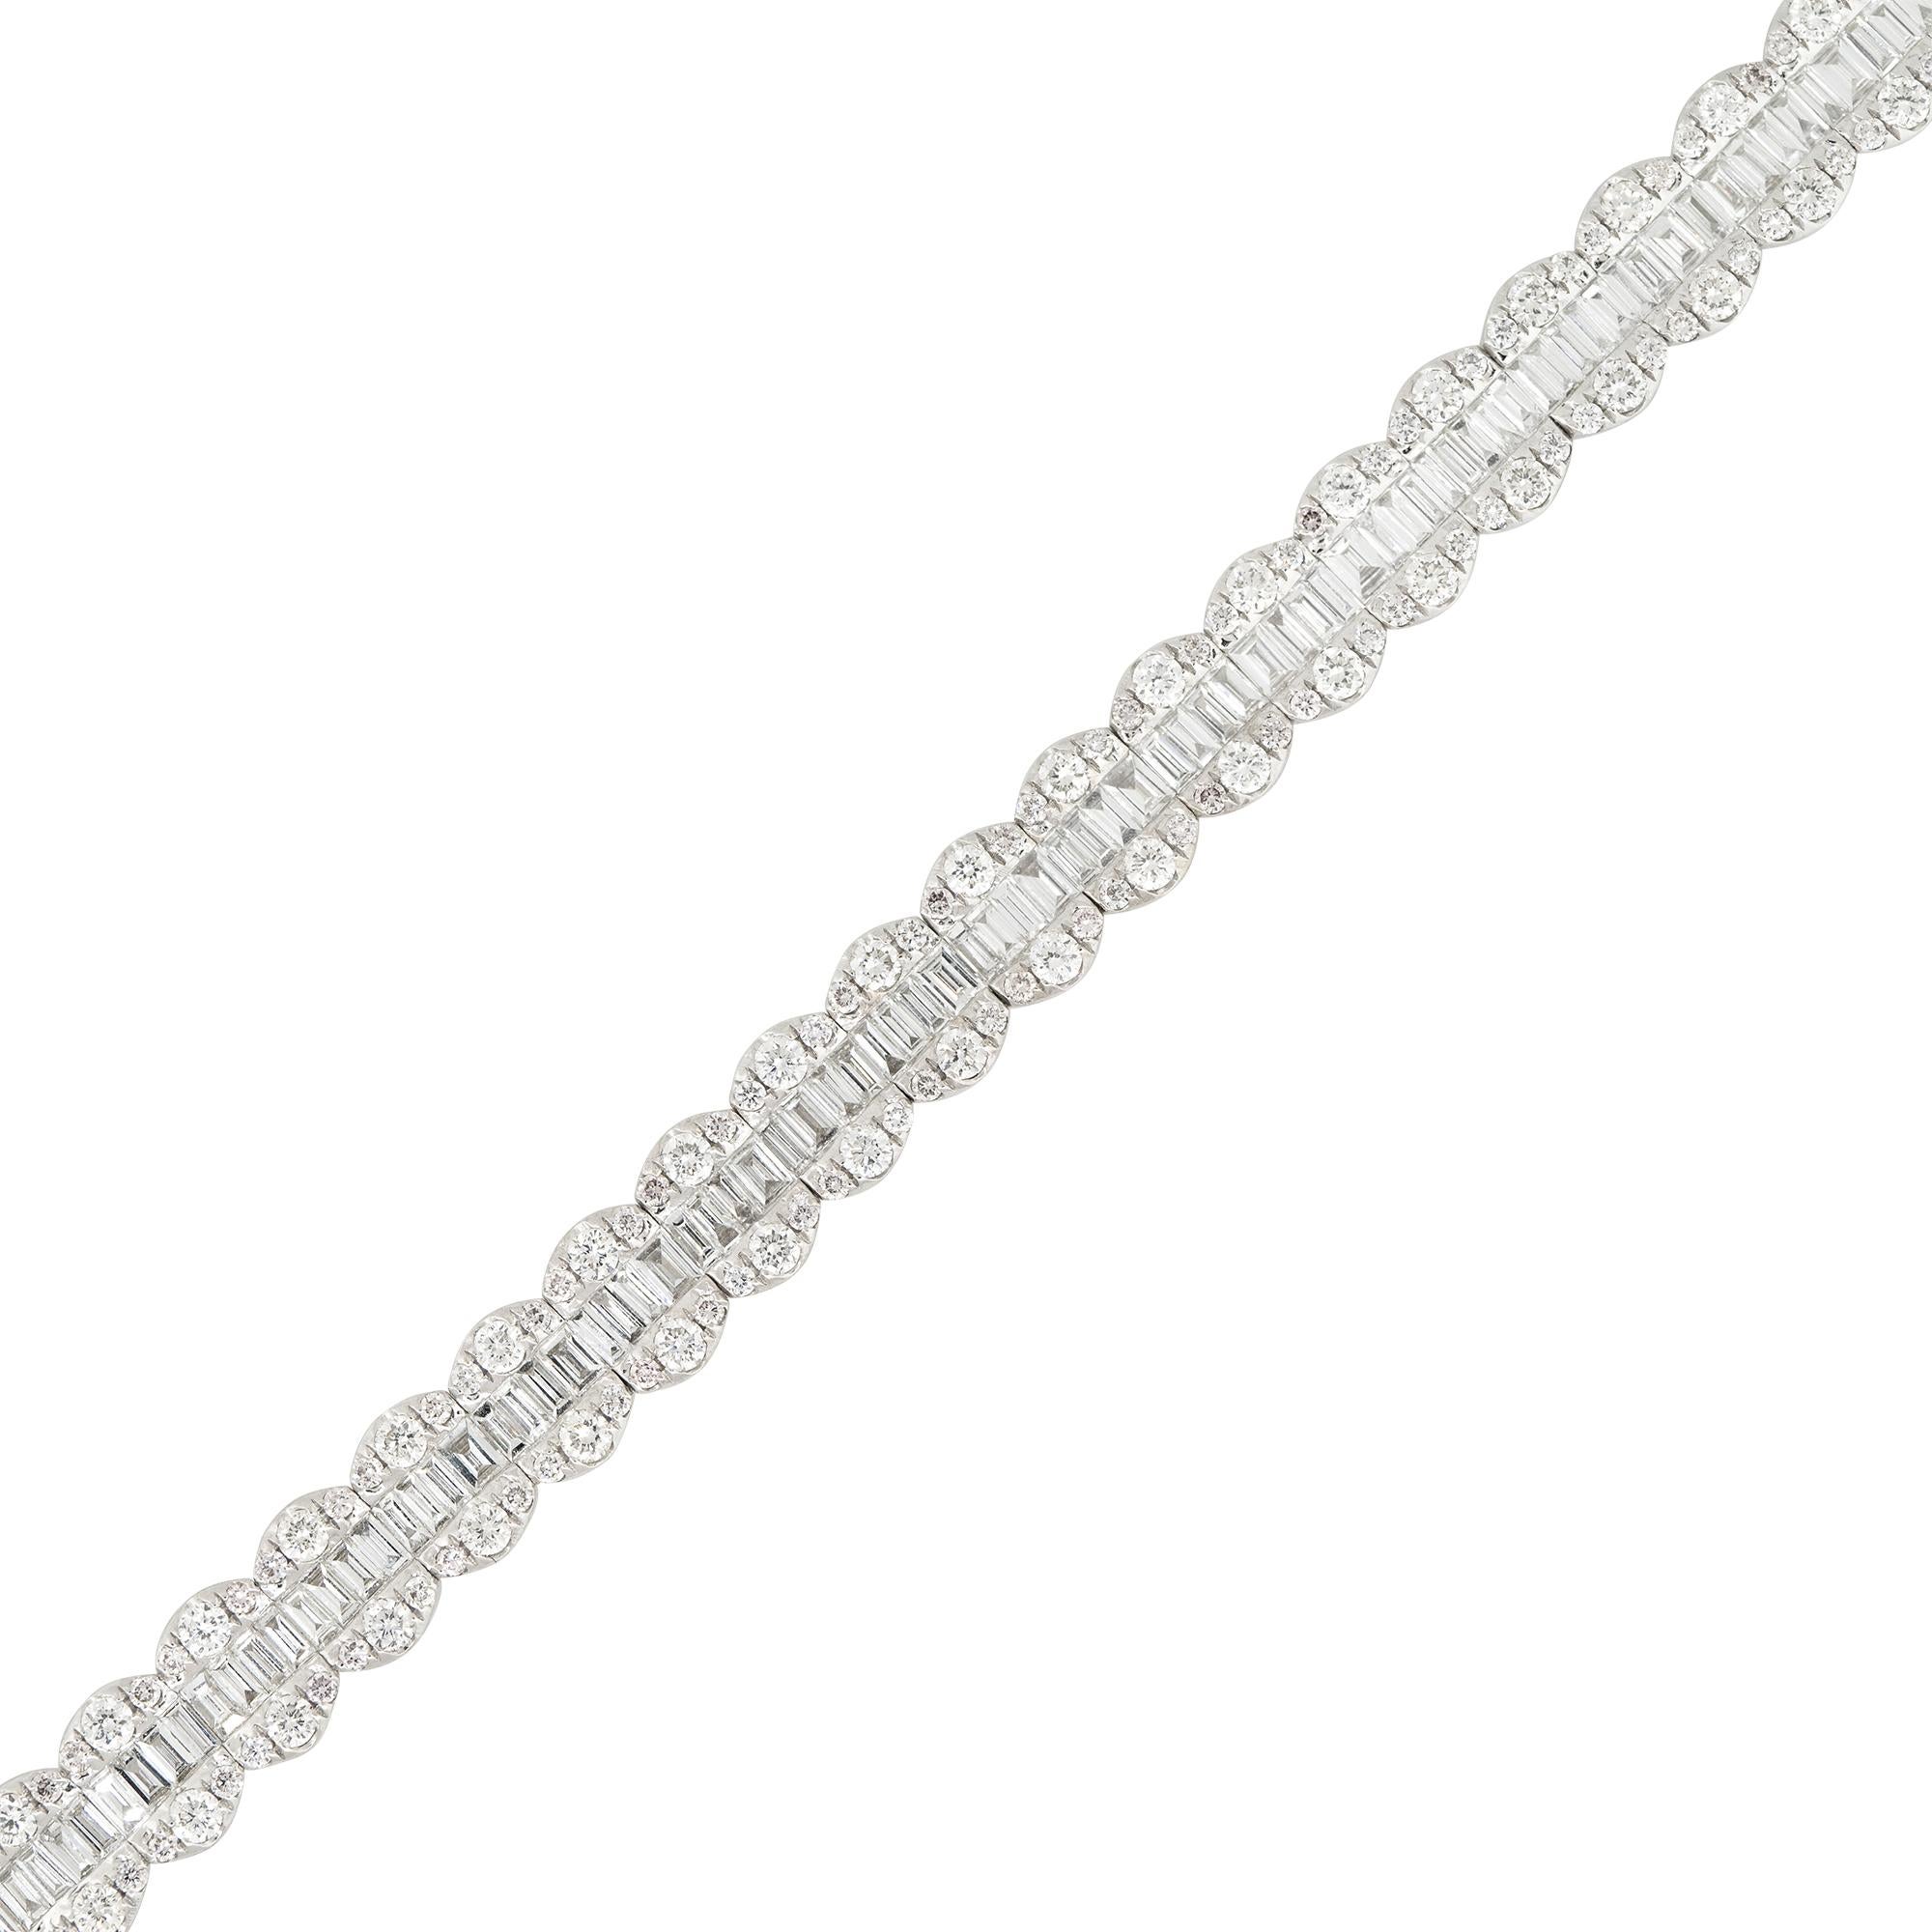 18k White Gold 6.5ctw Round Brilliant and Baguette Cut Diamond Bracelet
Material: 18k White Gold
Diamond Details: There are approximately 3.19ctw of Round Brilliant cut Diamonds (214 stones total). And there are approximately 3.31ctw of Baguette cut